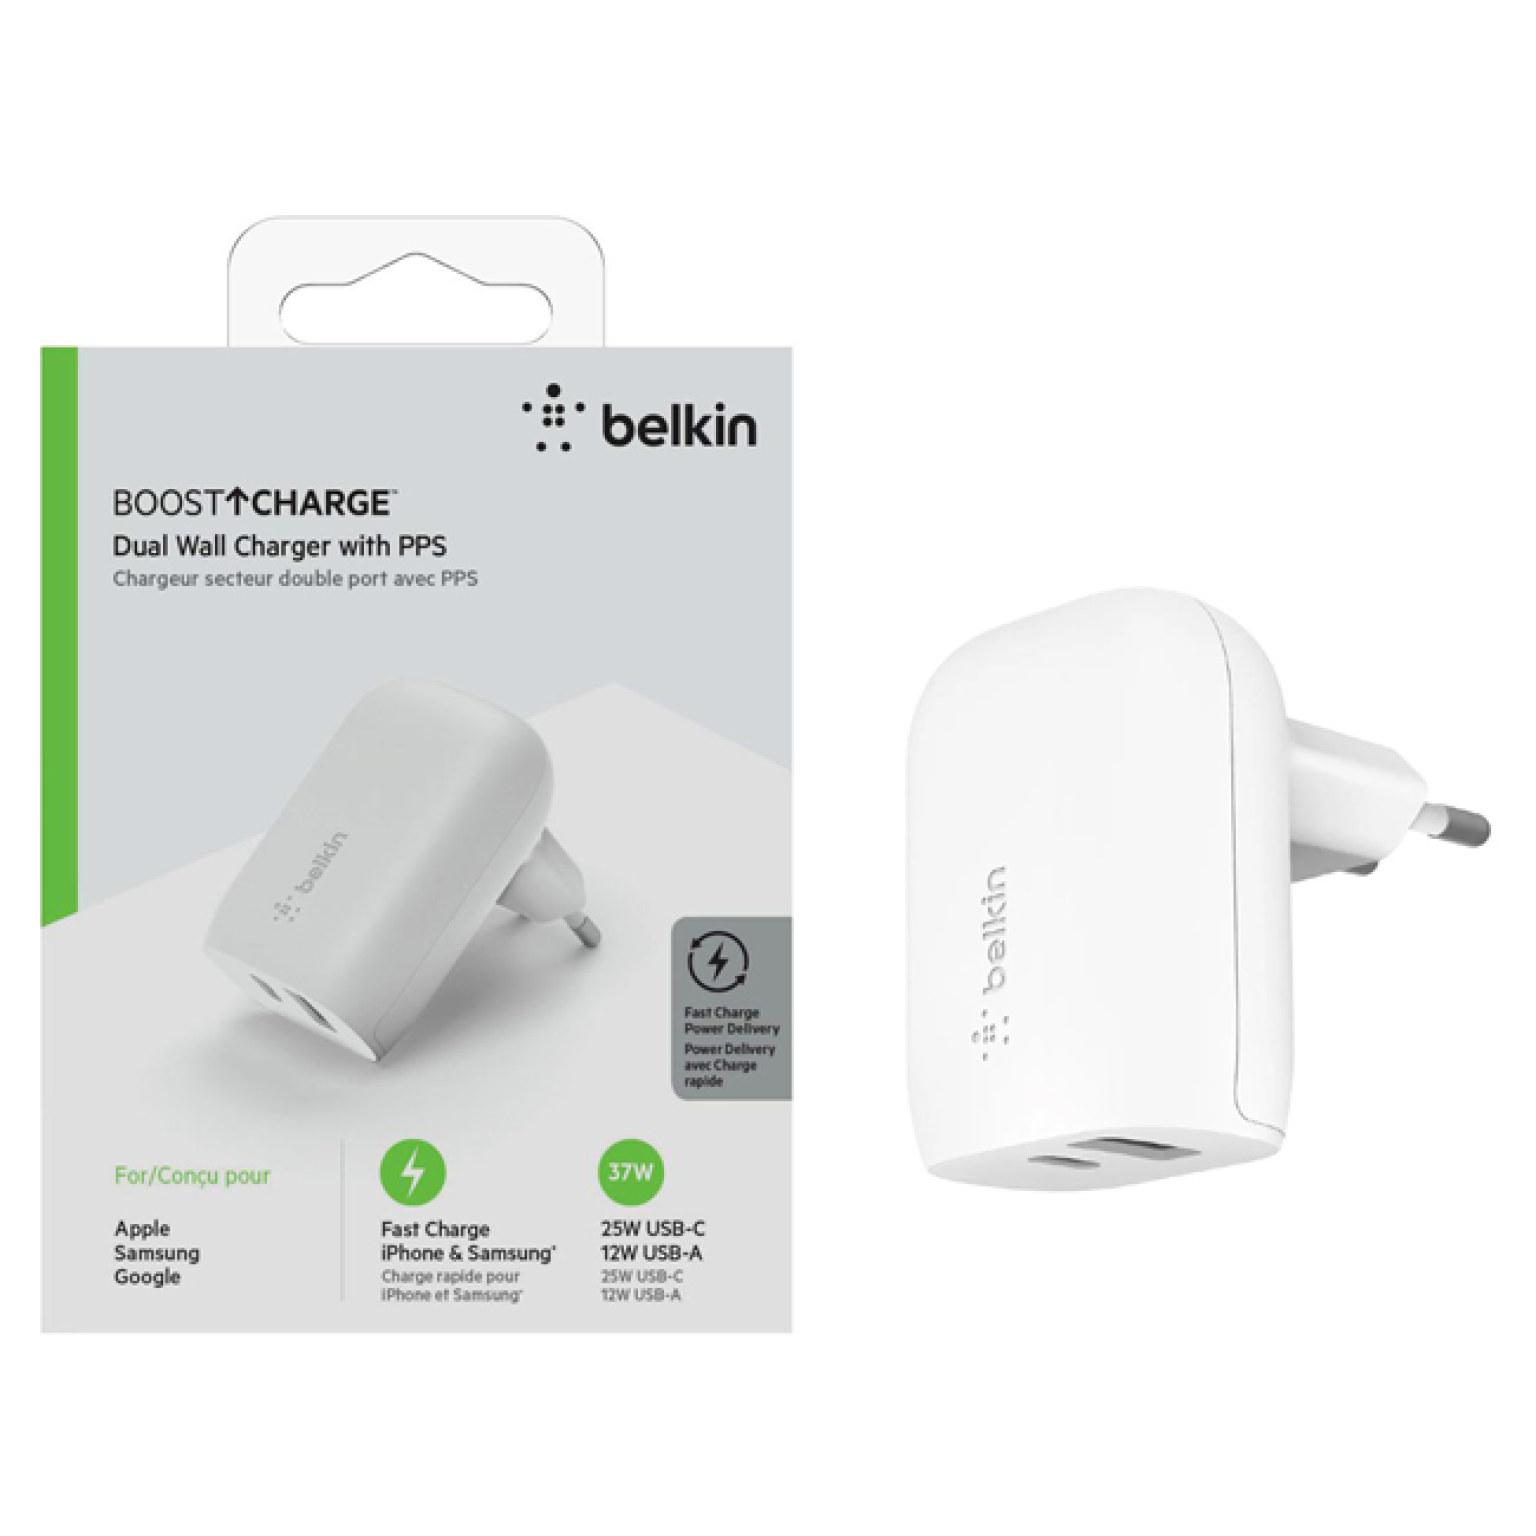 Belkin WCB007vfwh 37W two port fast wall charger 3